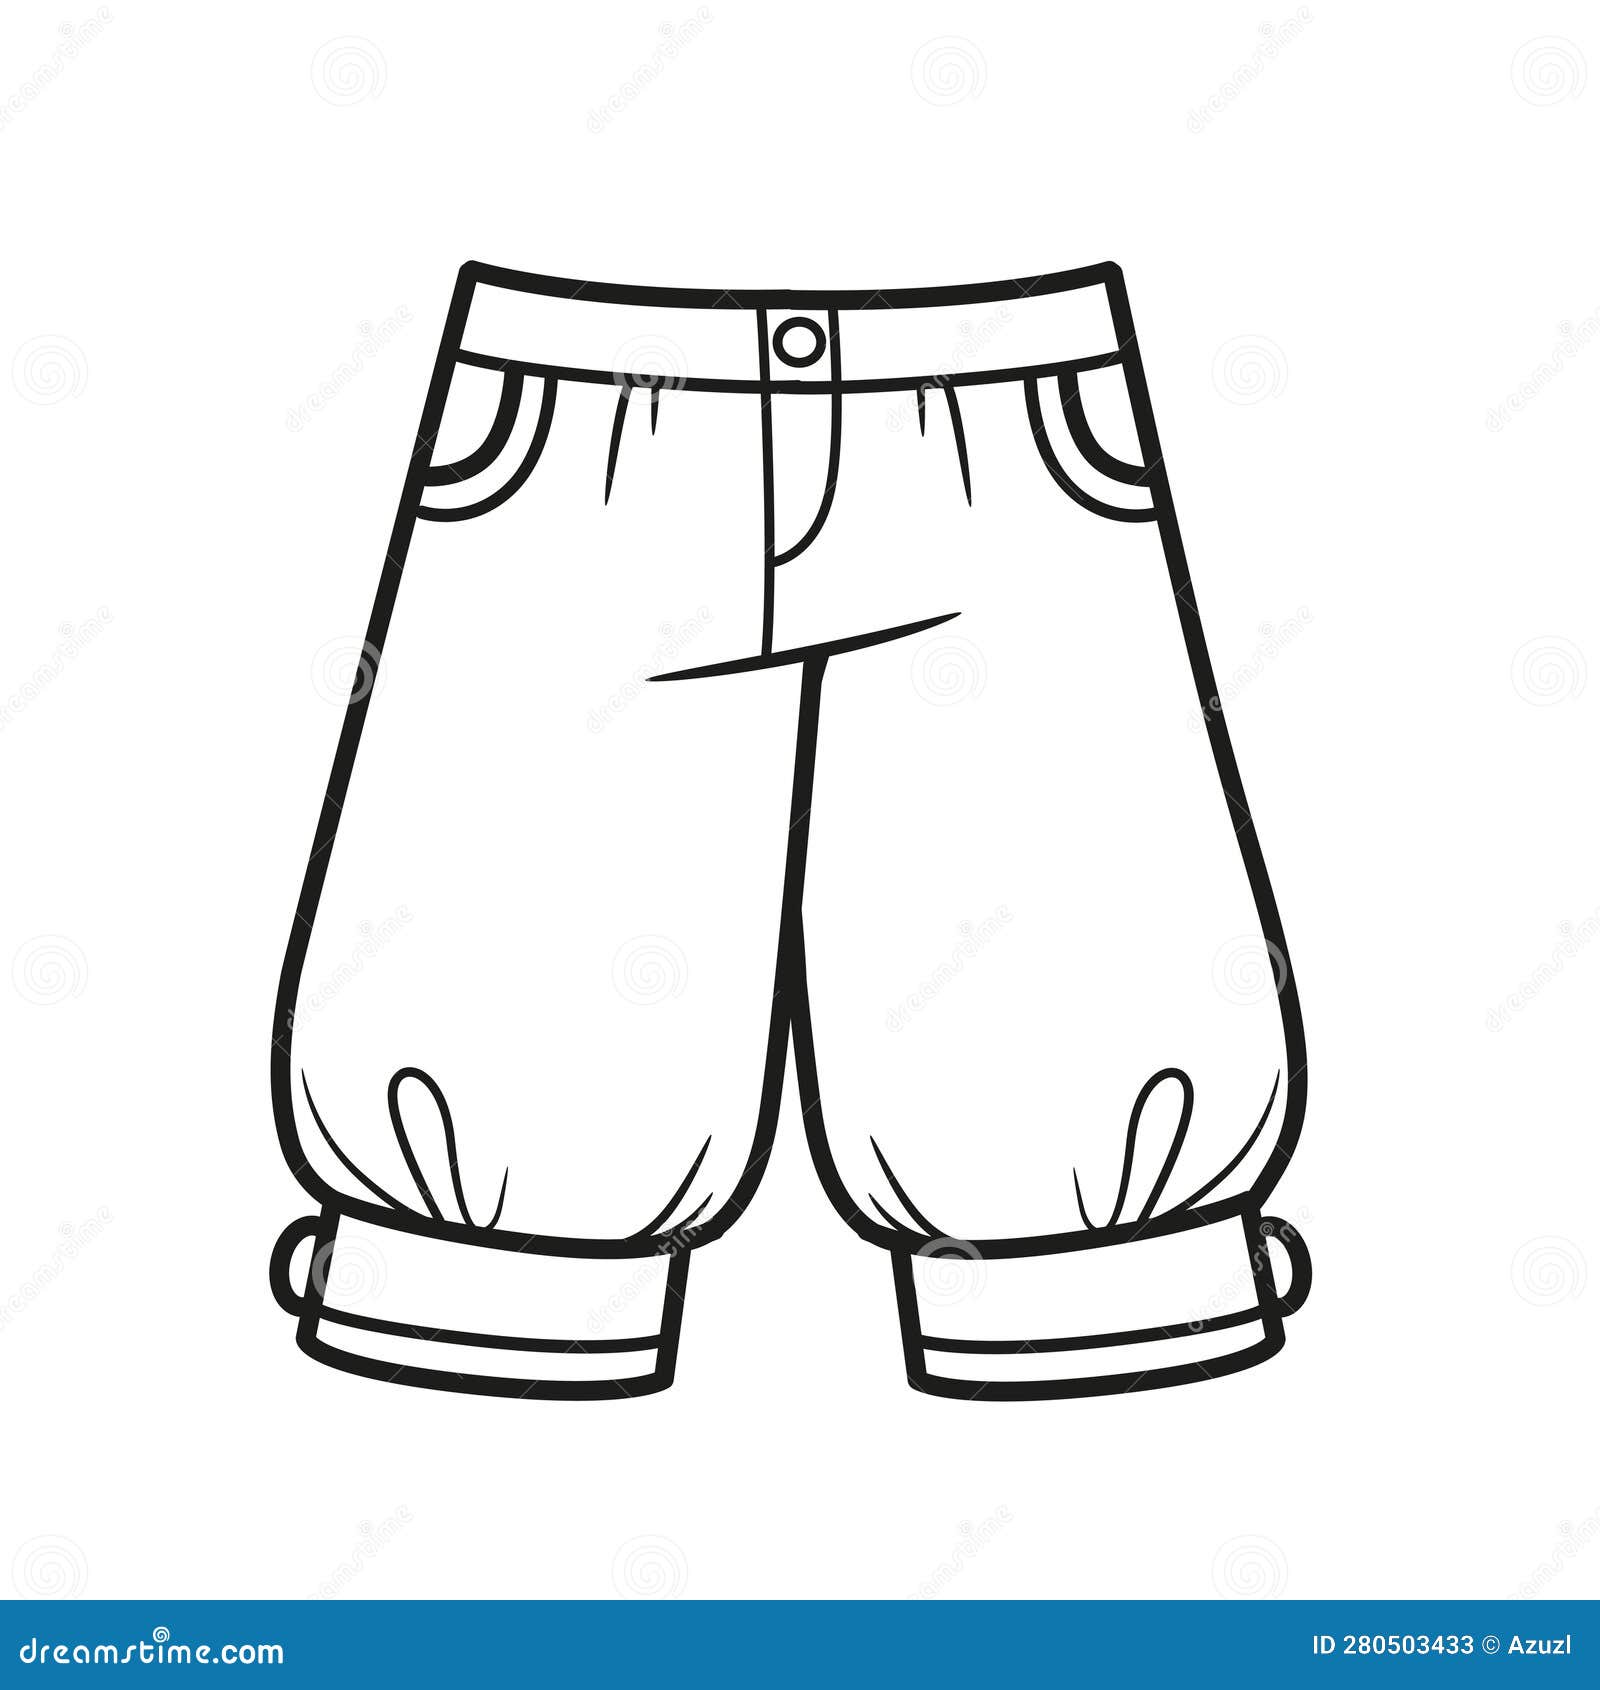 Breeches with Cuffs Outline for Coloring on a White Stock Vector ...